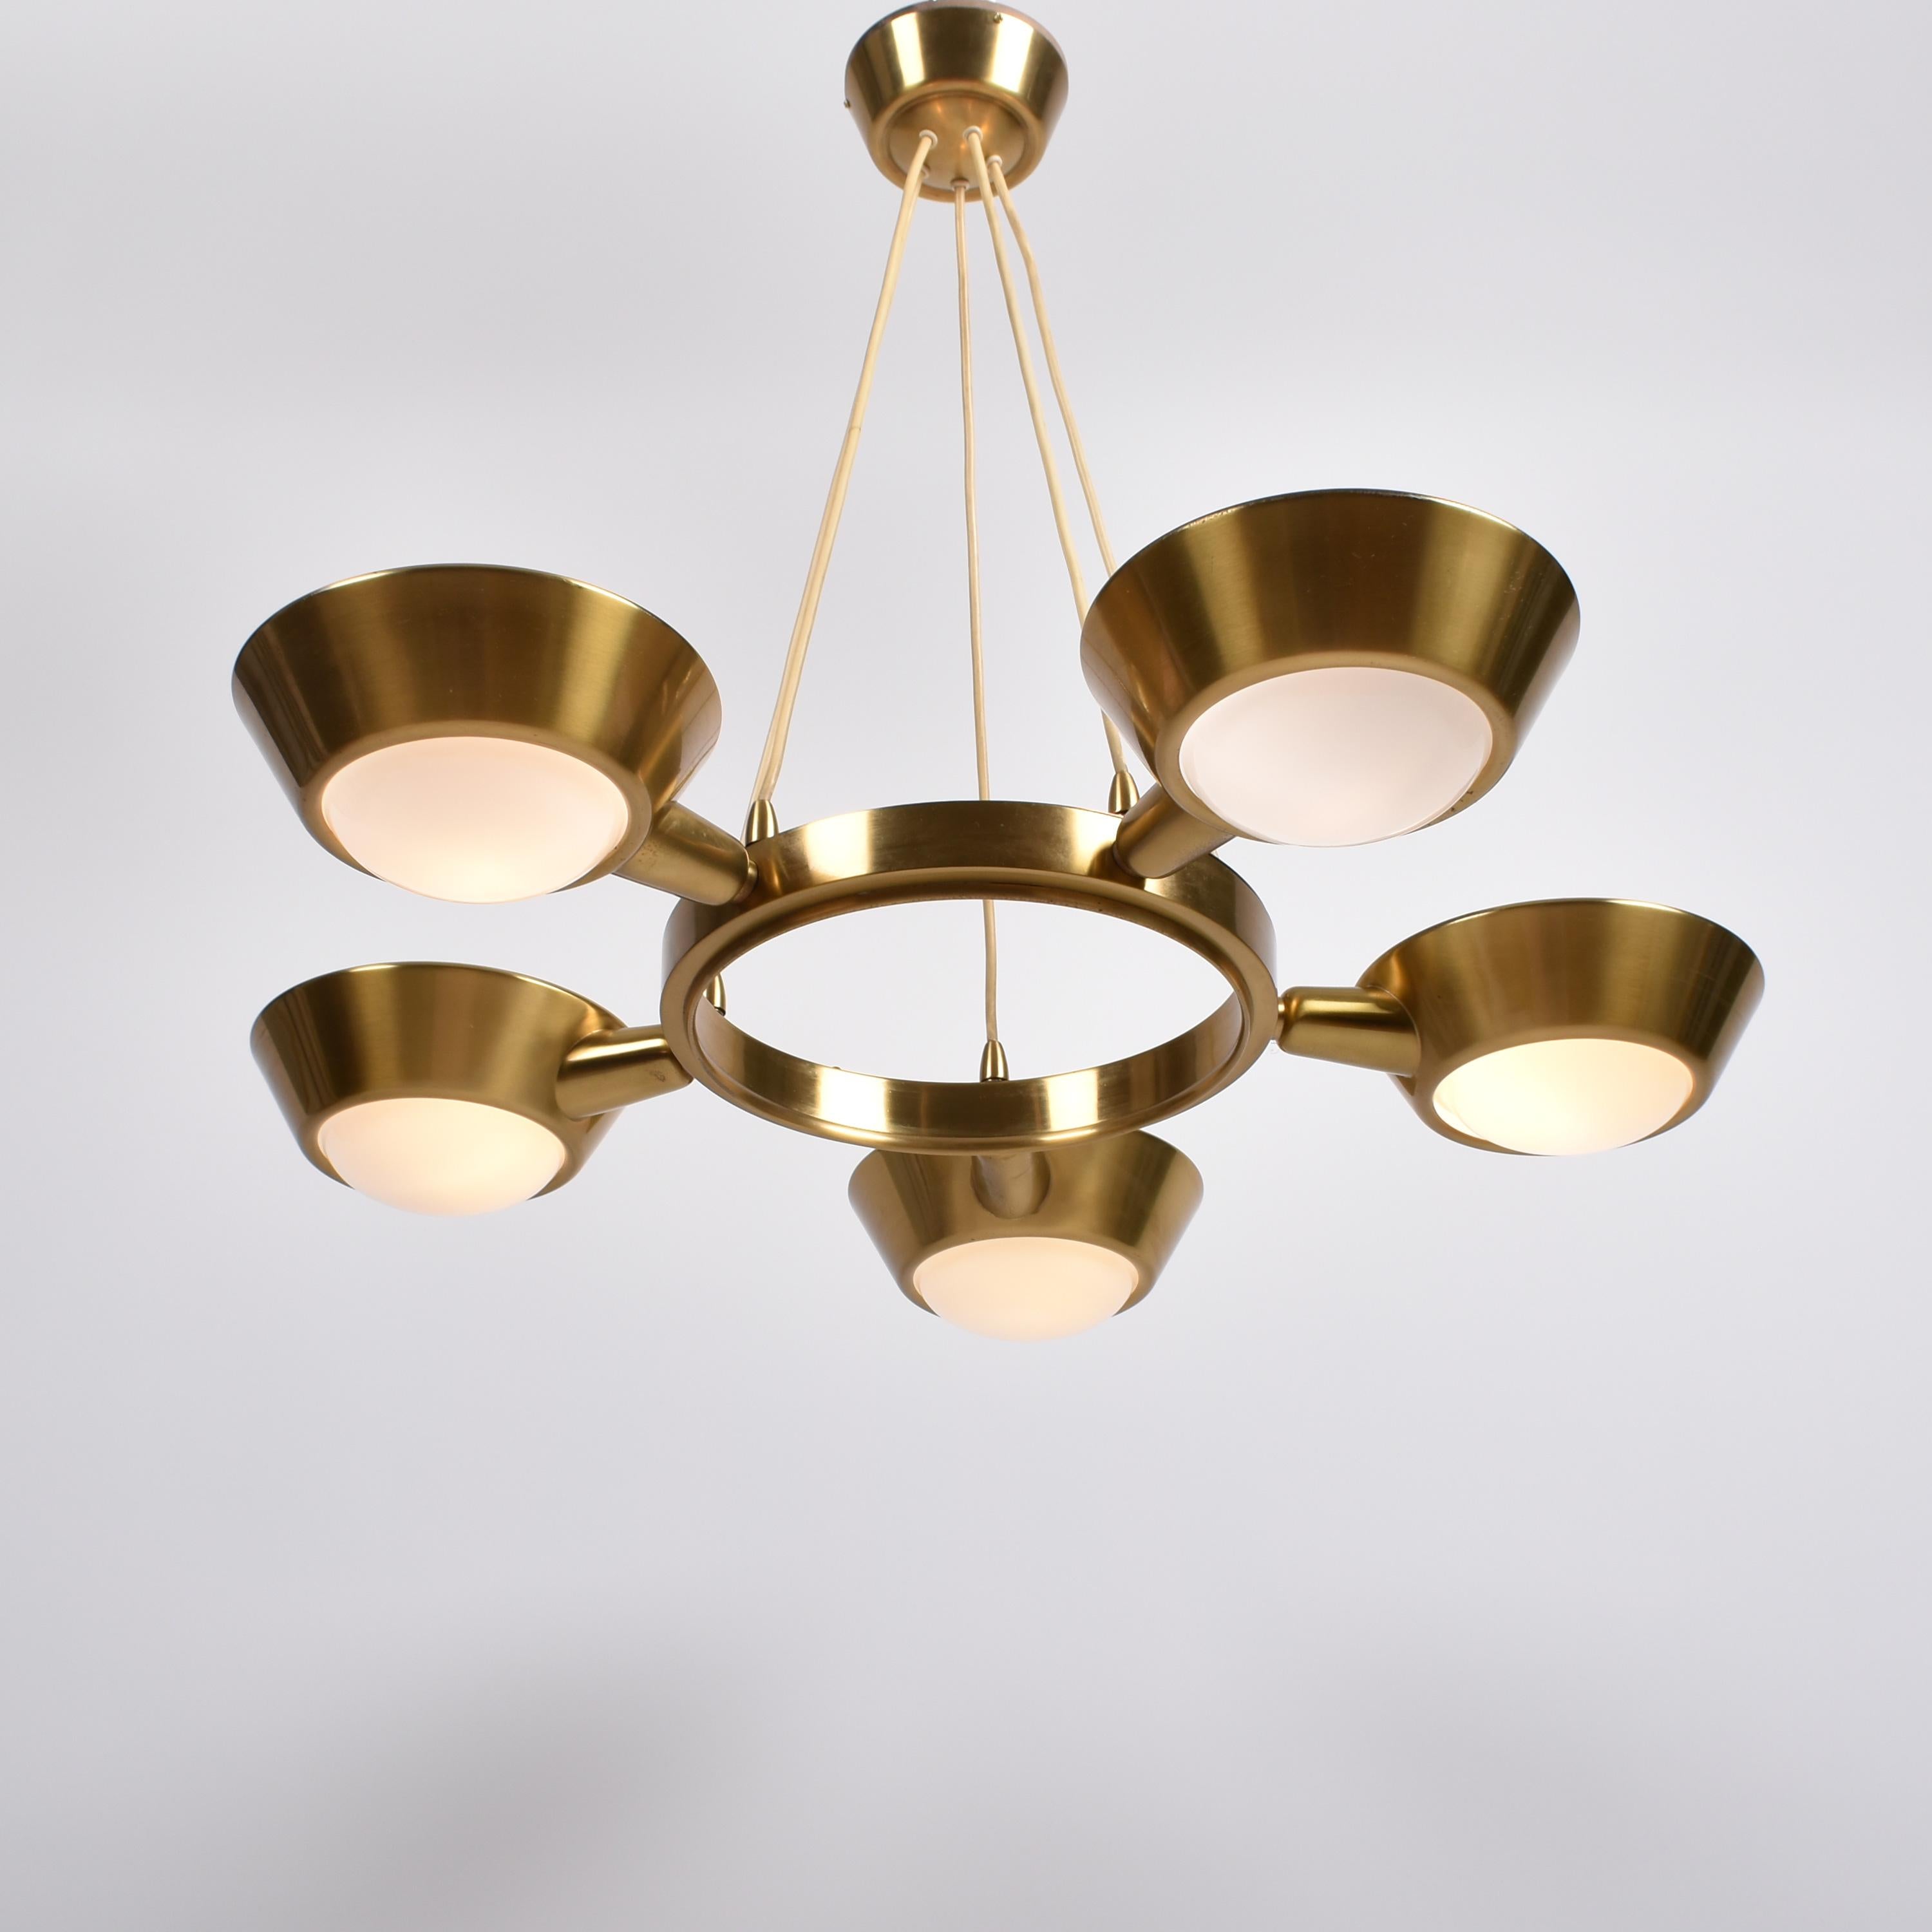 Large brass chandelier with five lights , Switzerland, 1940.
Five reflectors, brass outside and white lacquered inside, are placed around a brass circle.
The reflectors have a frosted glass lens, which indicates an early production (1935 - 1940),